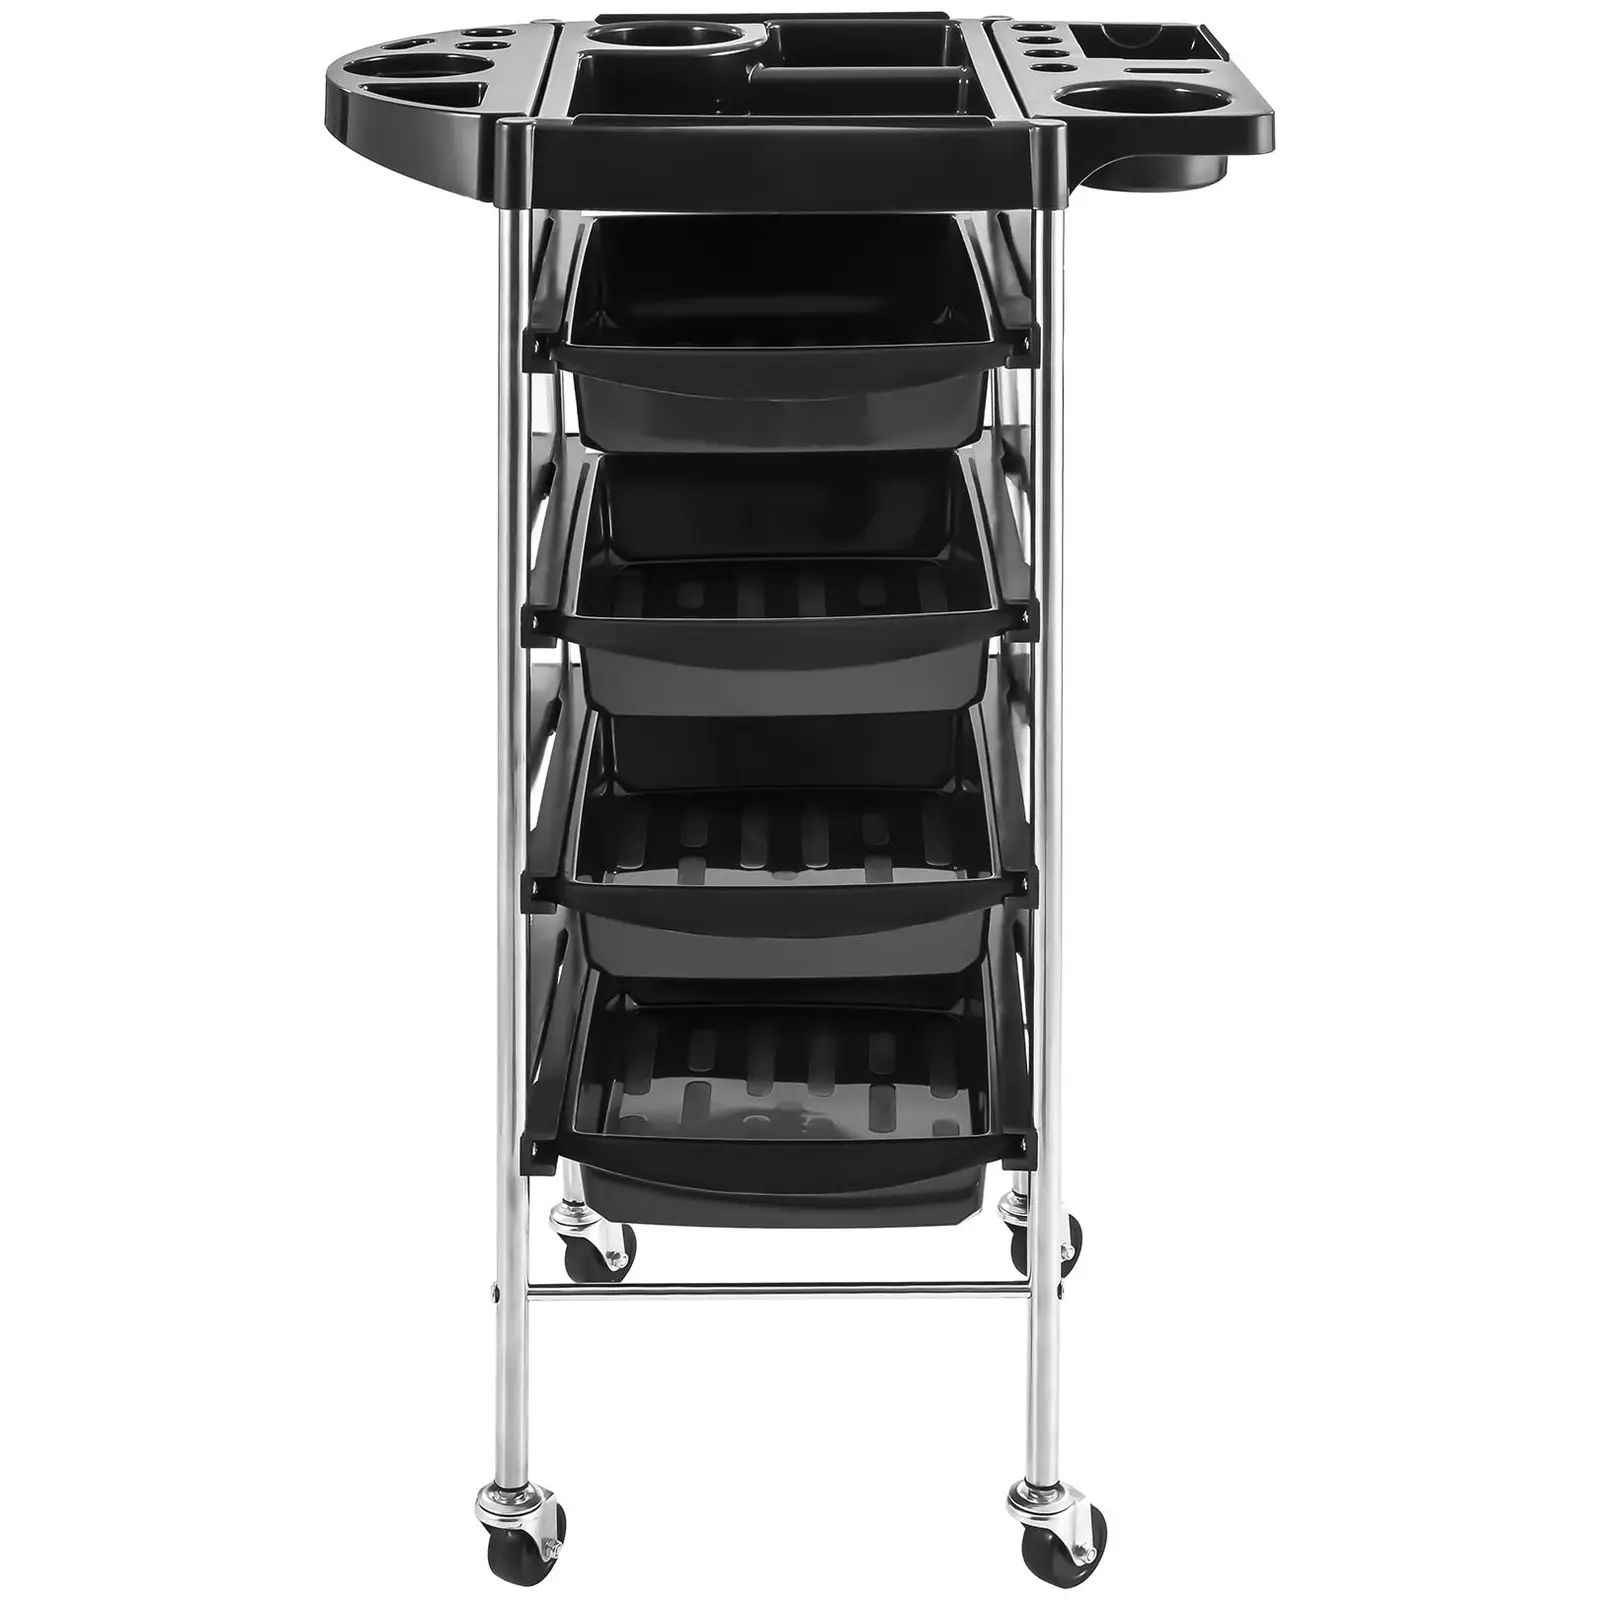 Roller shelf RR-7 from Physa